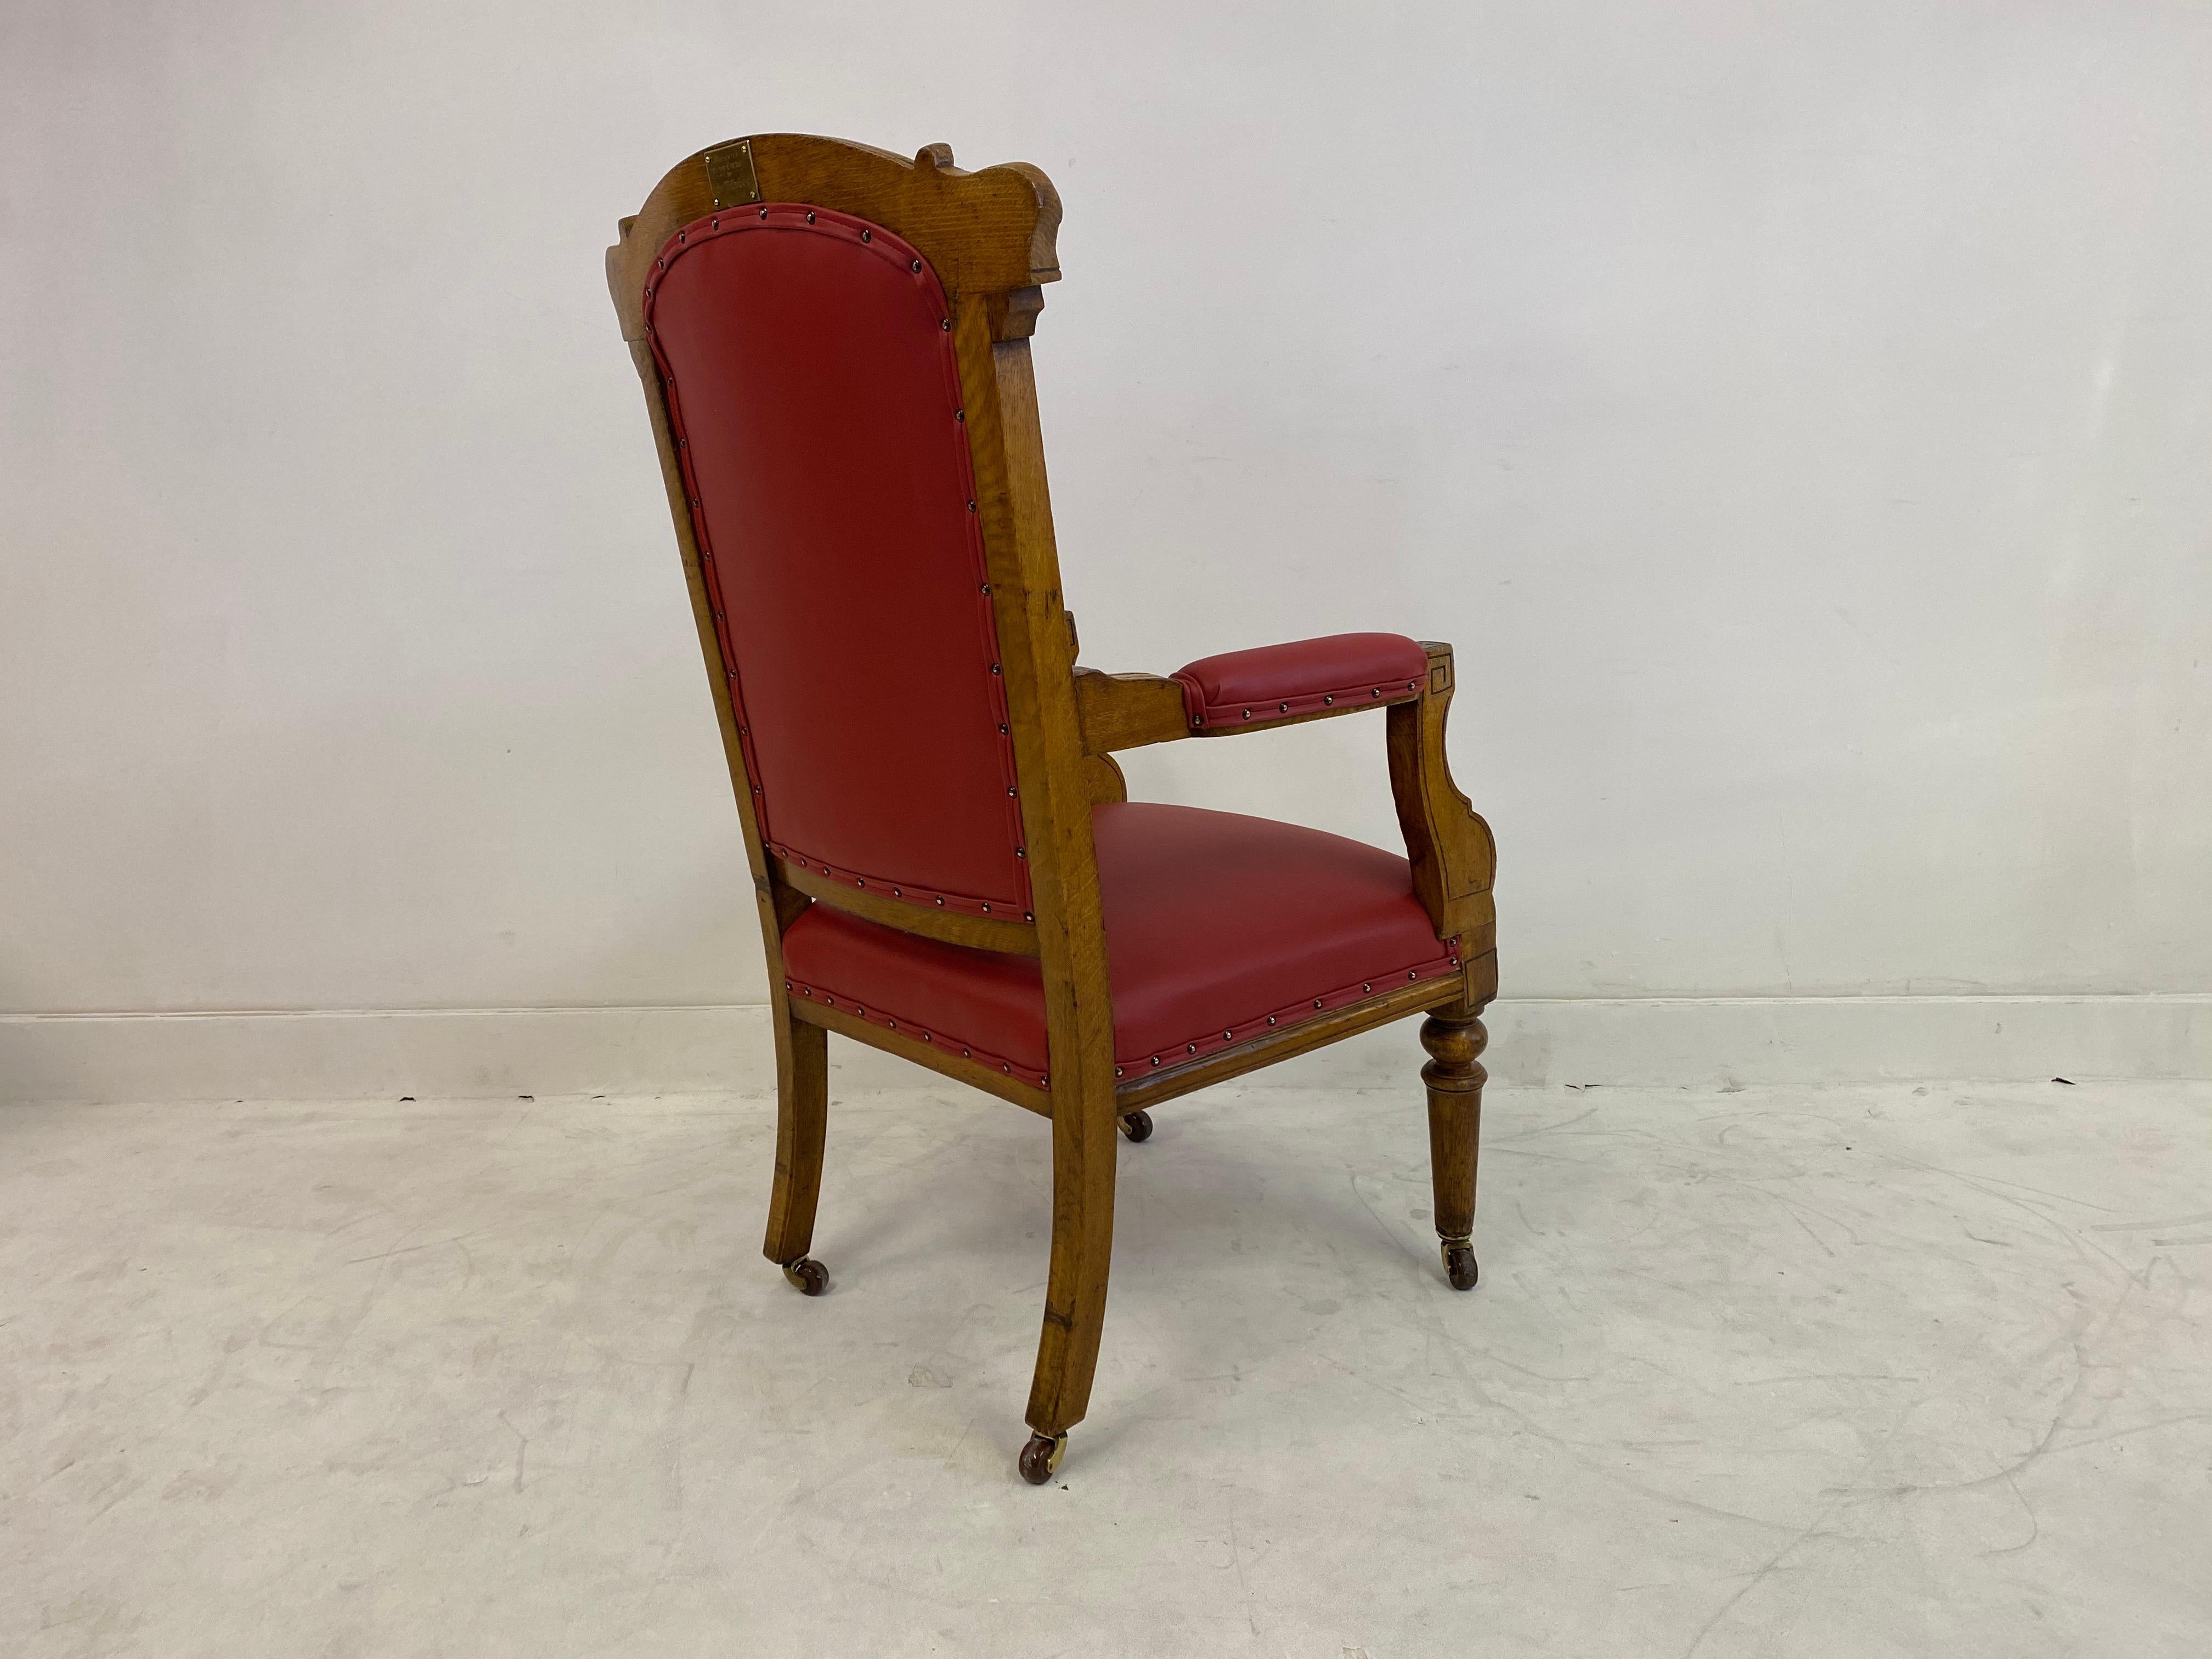 19th Century Antique Victorian Light Oak Throne Armchair in Red Leather